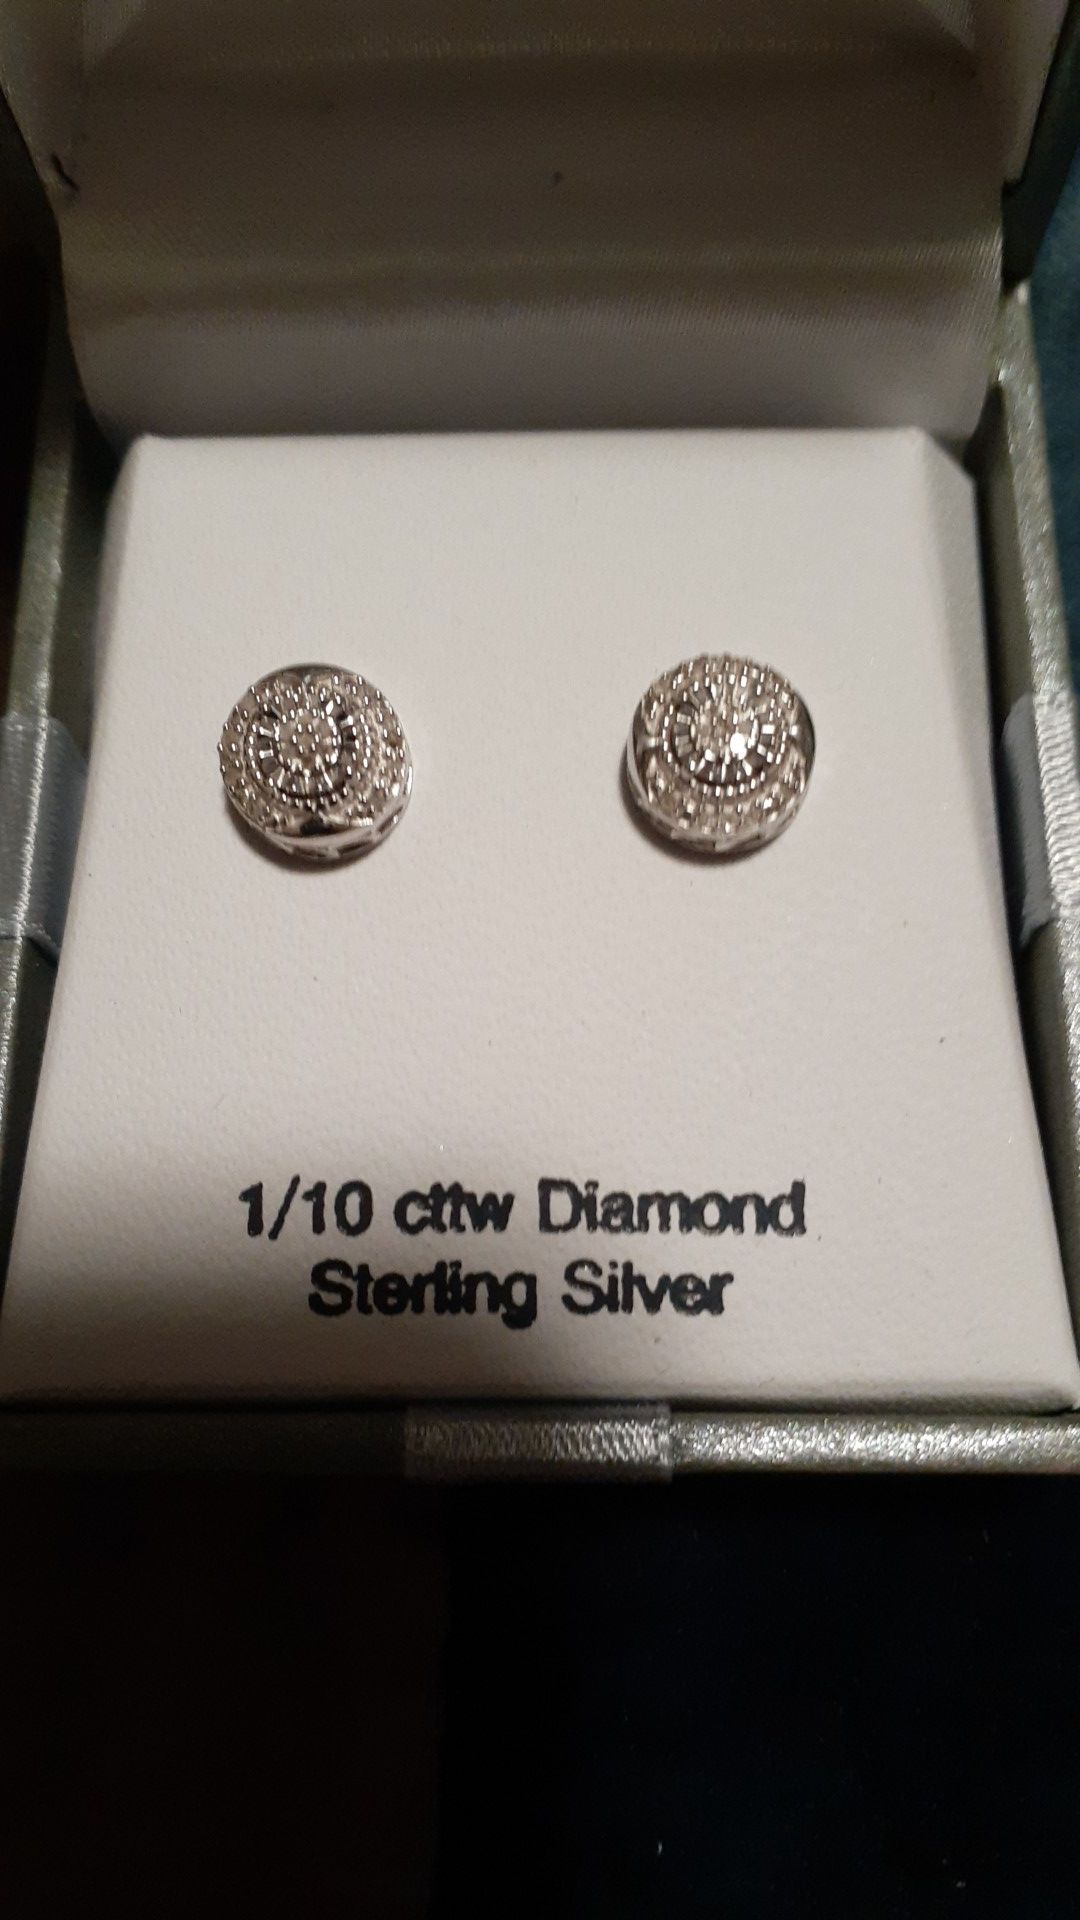 Sterling silver with 1/10 cttw Diamond